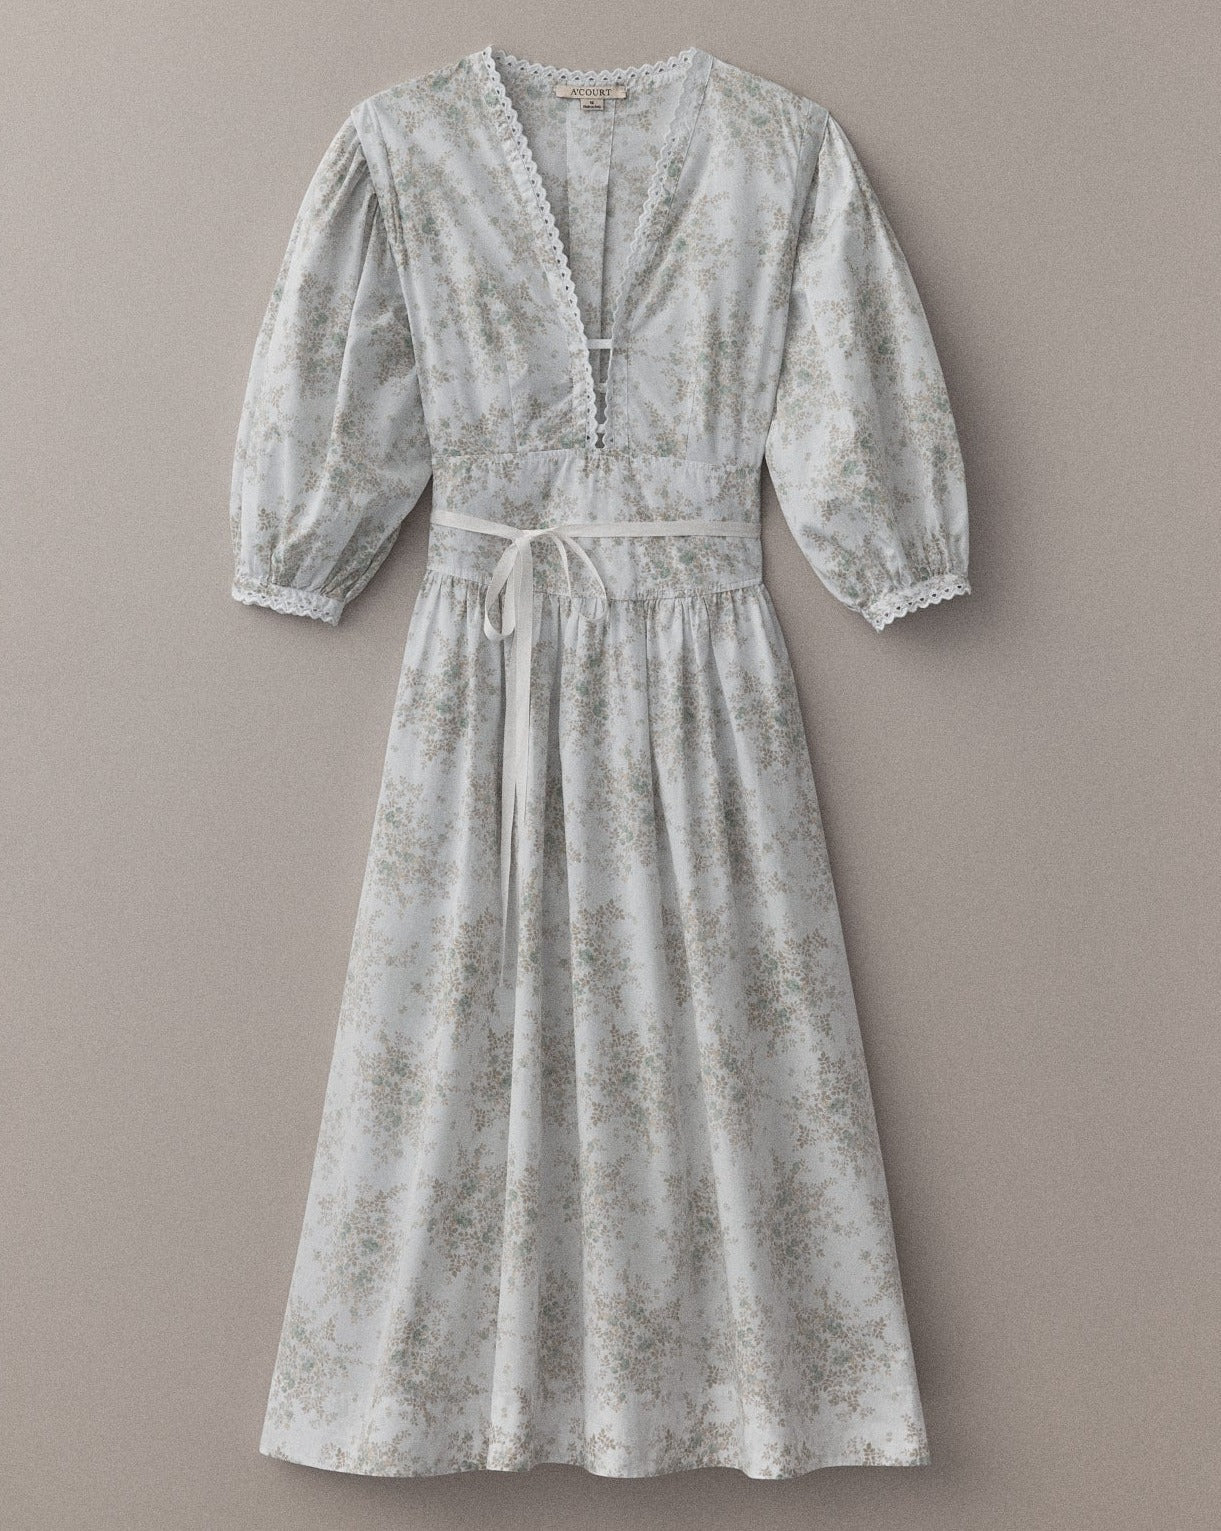 A white and blue floral long-sleeve maxi dress with puff sleeves and eyelet trim lies flat on a light brown field.